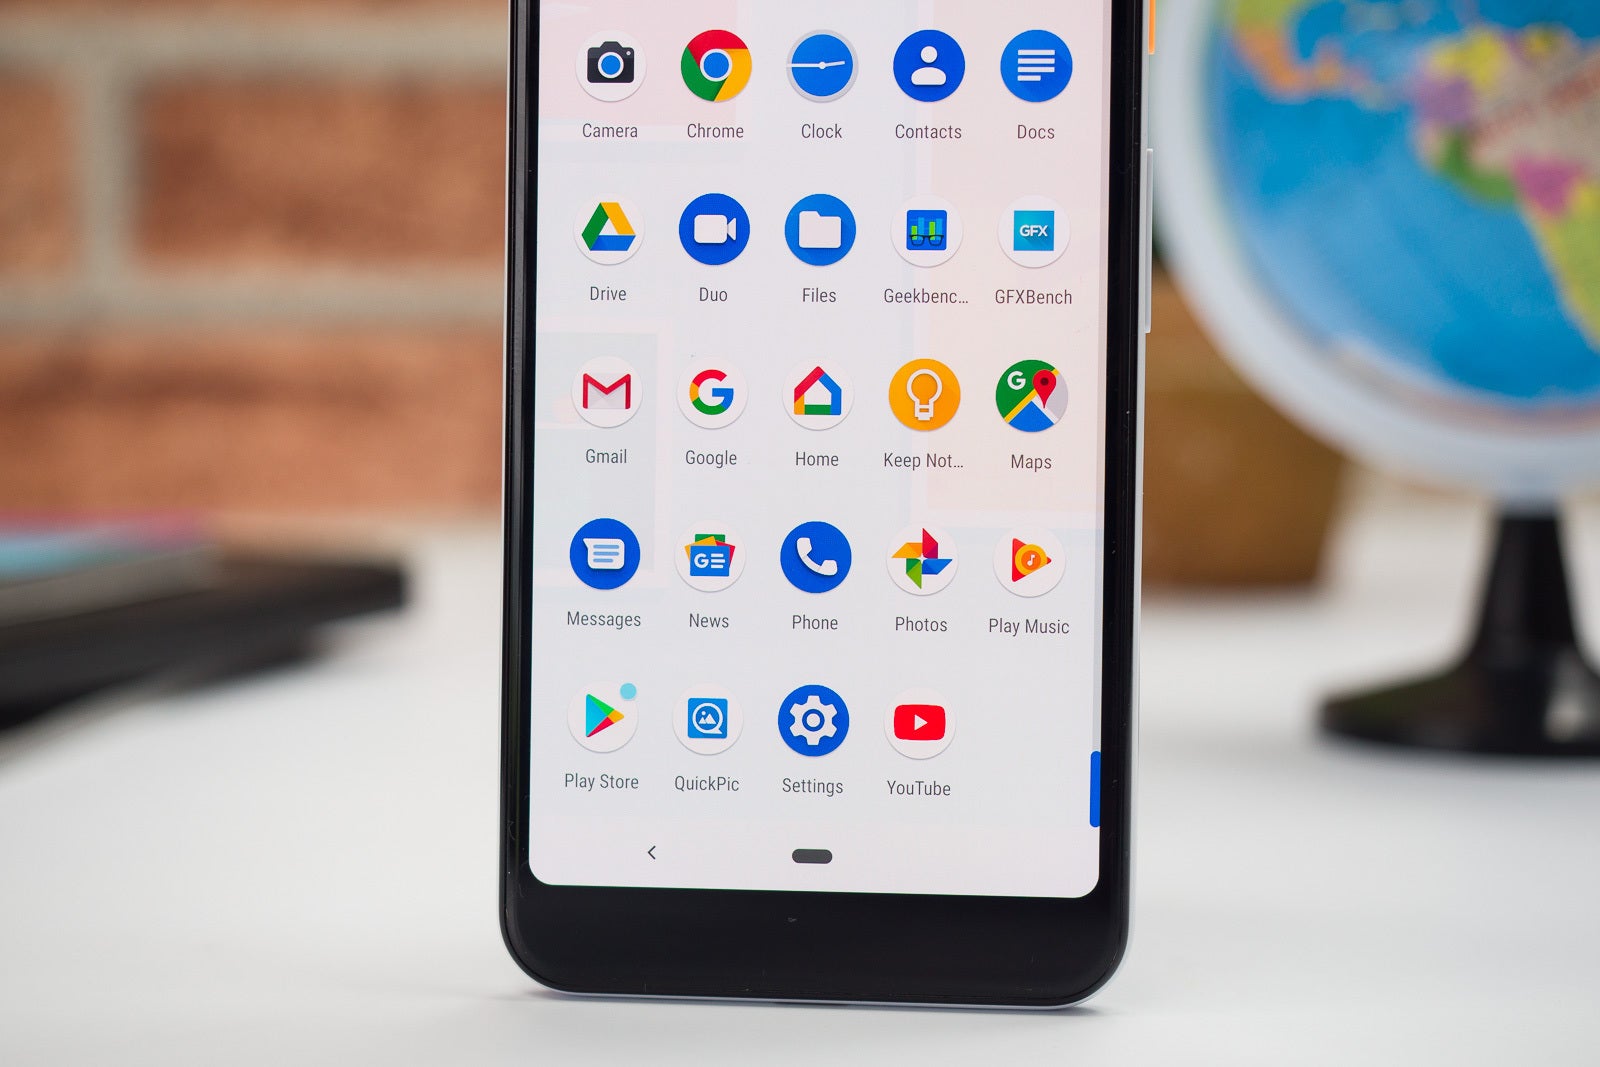 Apps are what really matters for Google - Why the Pixel 4a is not a real competitor to the iPhone SE